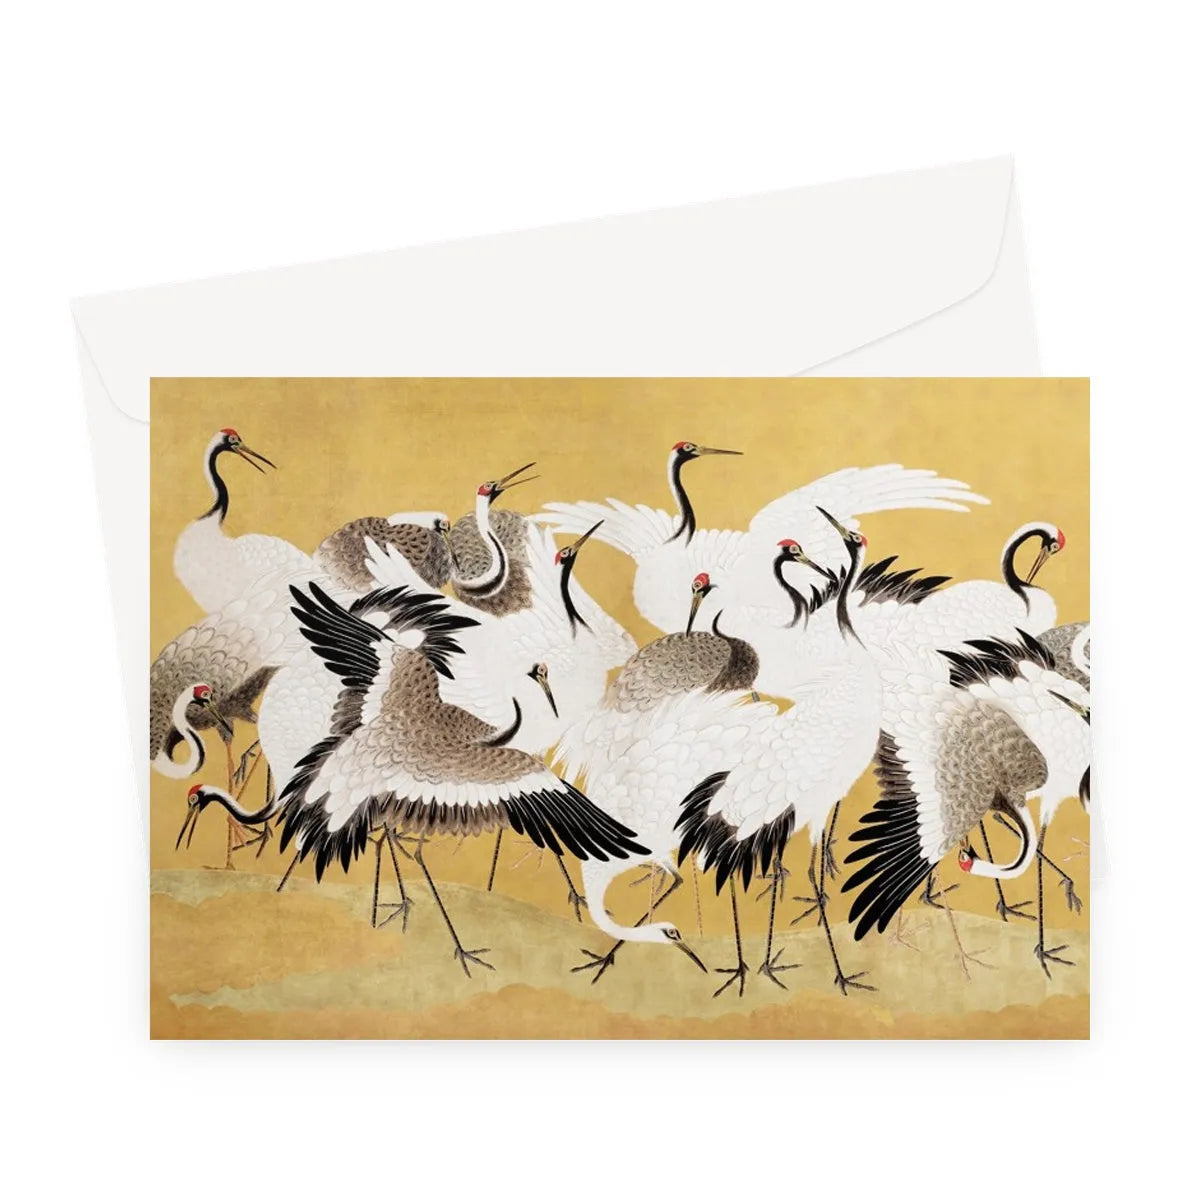 Flock Of Cranes By Ishida Yūtei Greeting Card - A5 Landscape / 1 Card - Greeting & Note Cards - Aesthetic Art